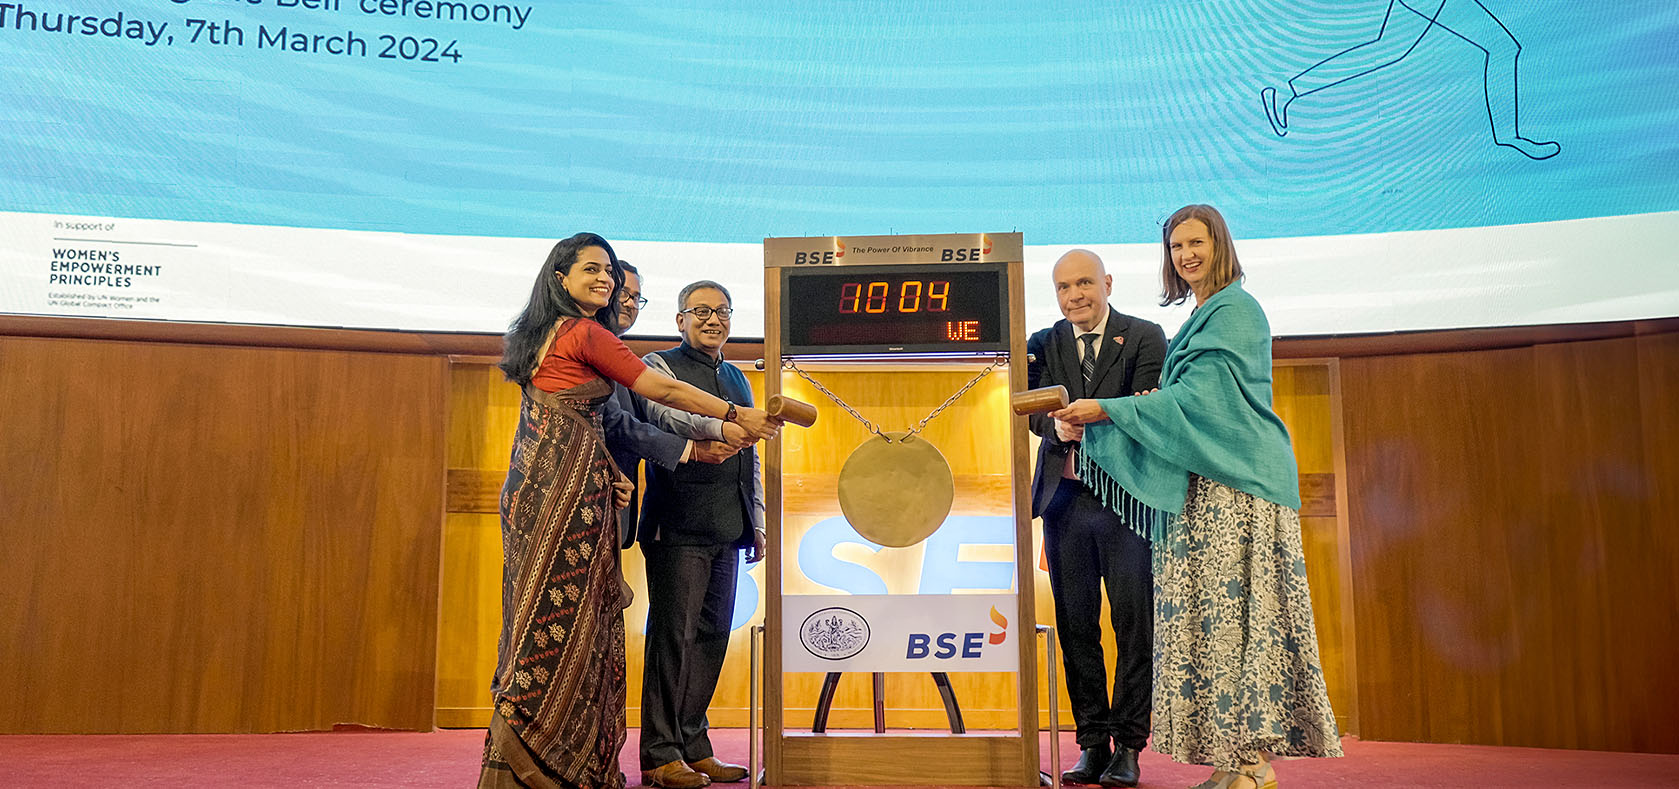 Ringing the bell at BSE India on 7th March 2024. Photo: UN Women